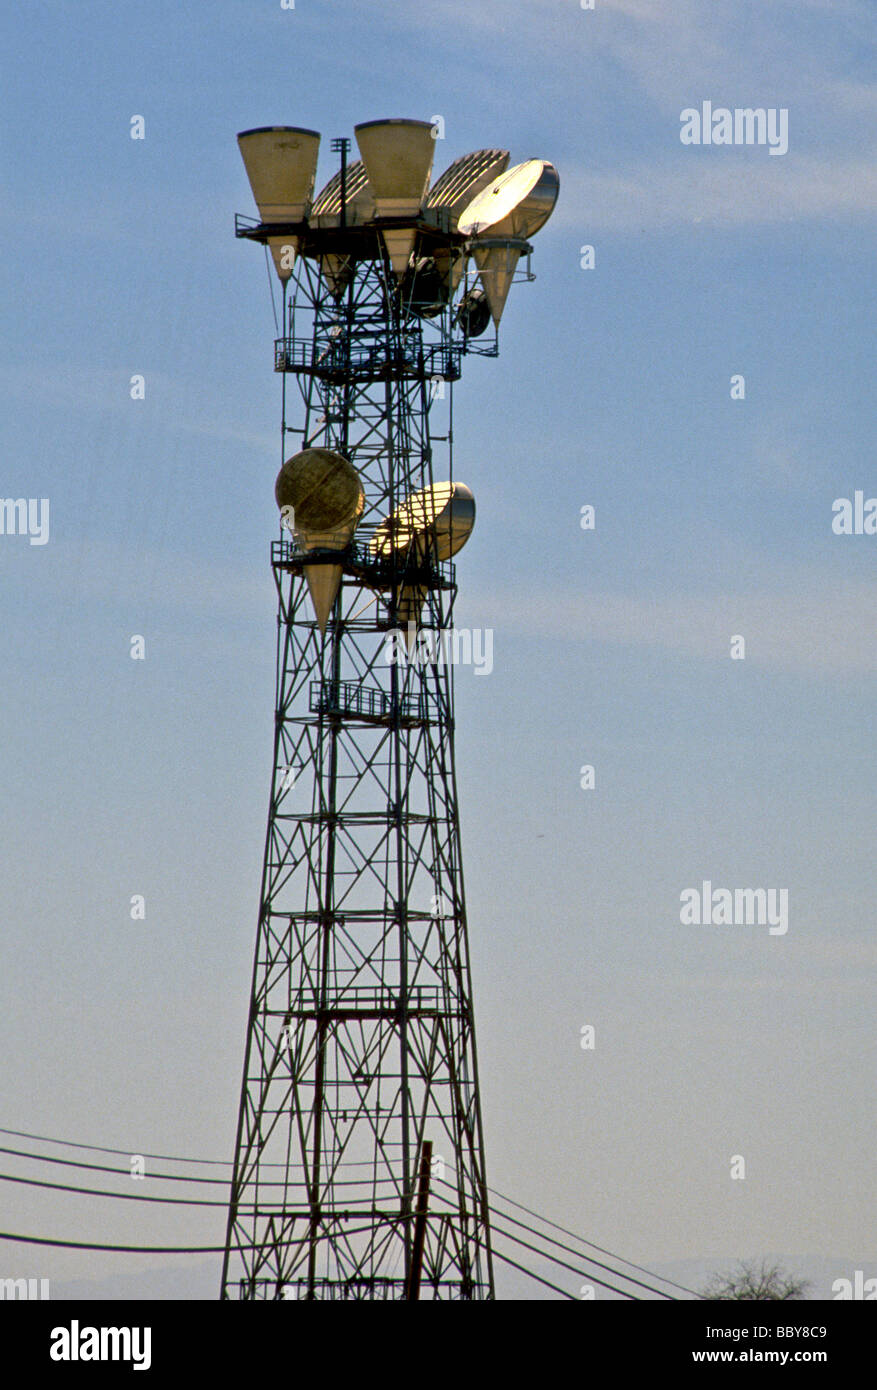 https://c8.alamy.com/comp/BBY8C9/telephone-microwave-repeater-tower-electronic-communication-industry-BBY8C9.jpg